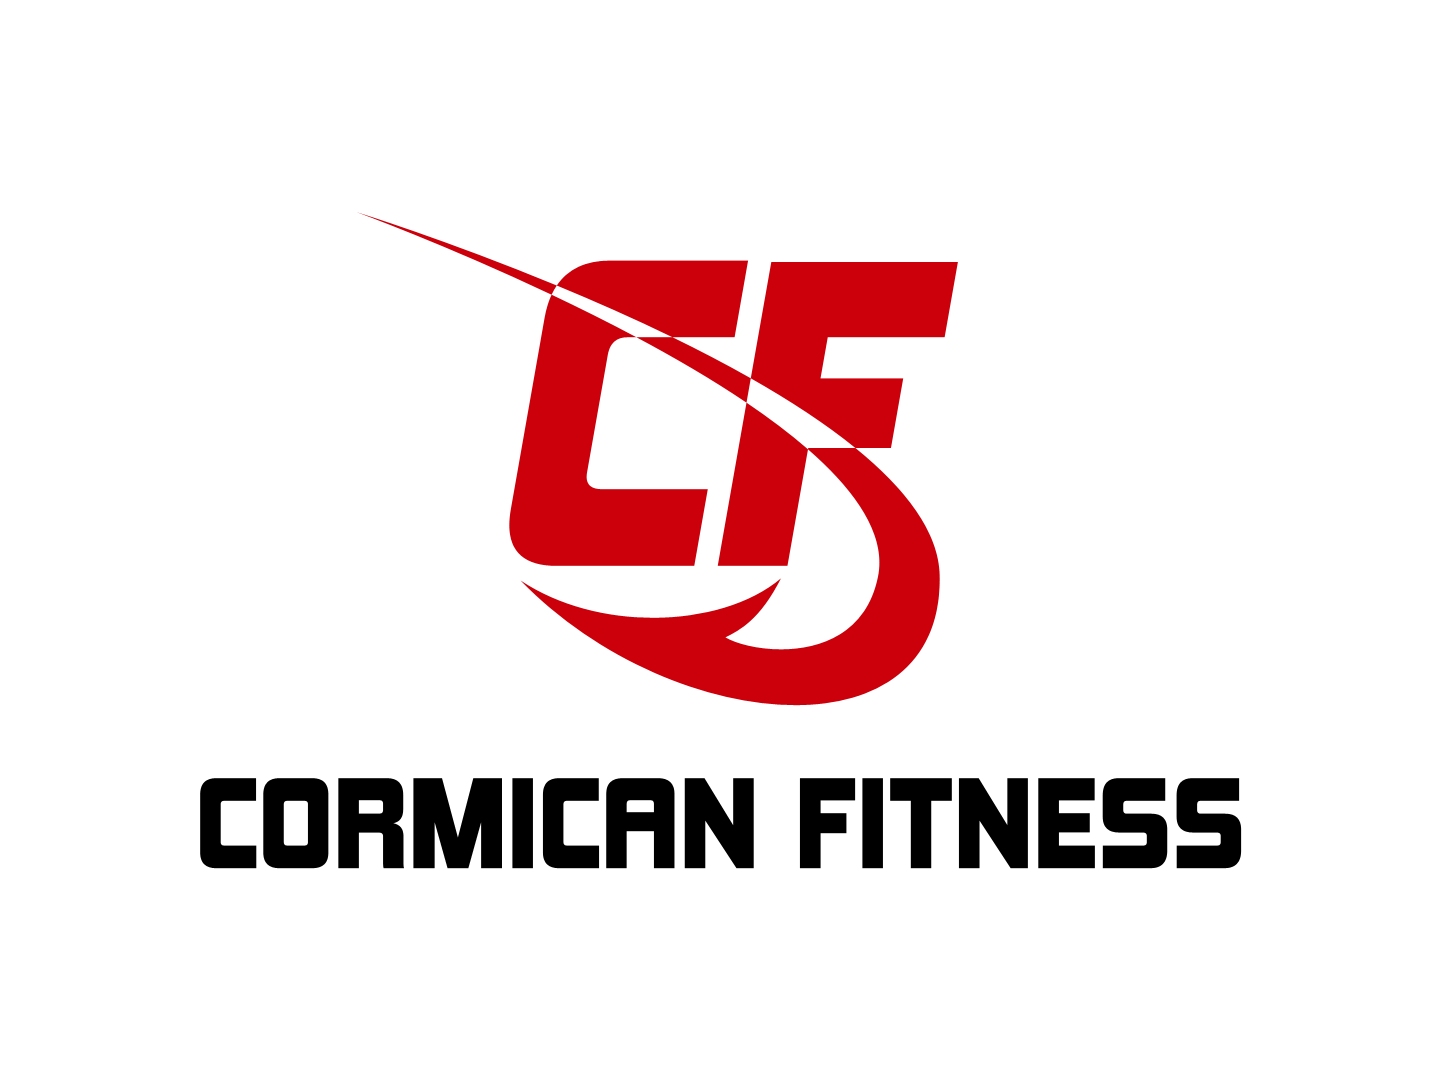 Cormican Fitness